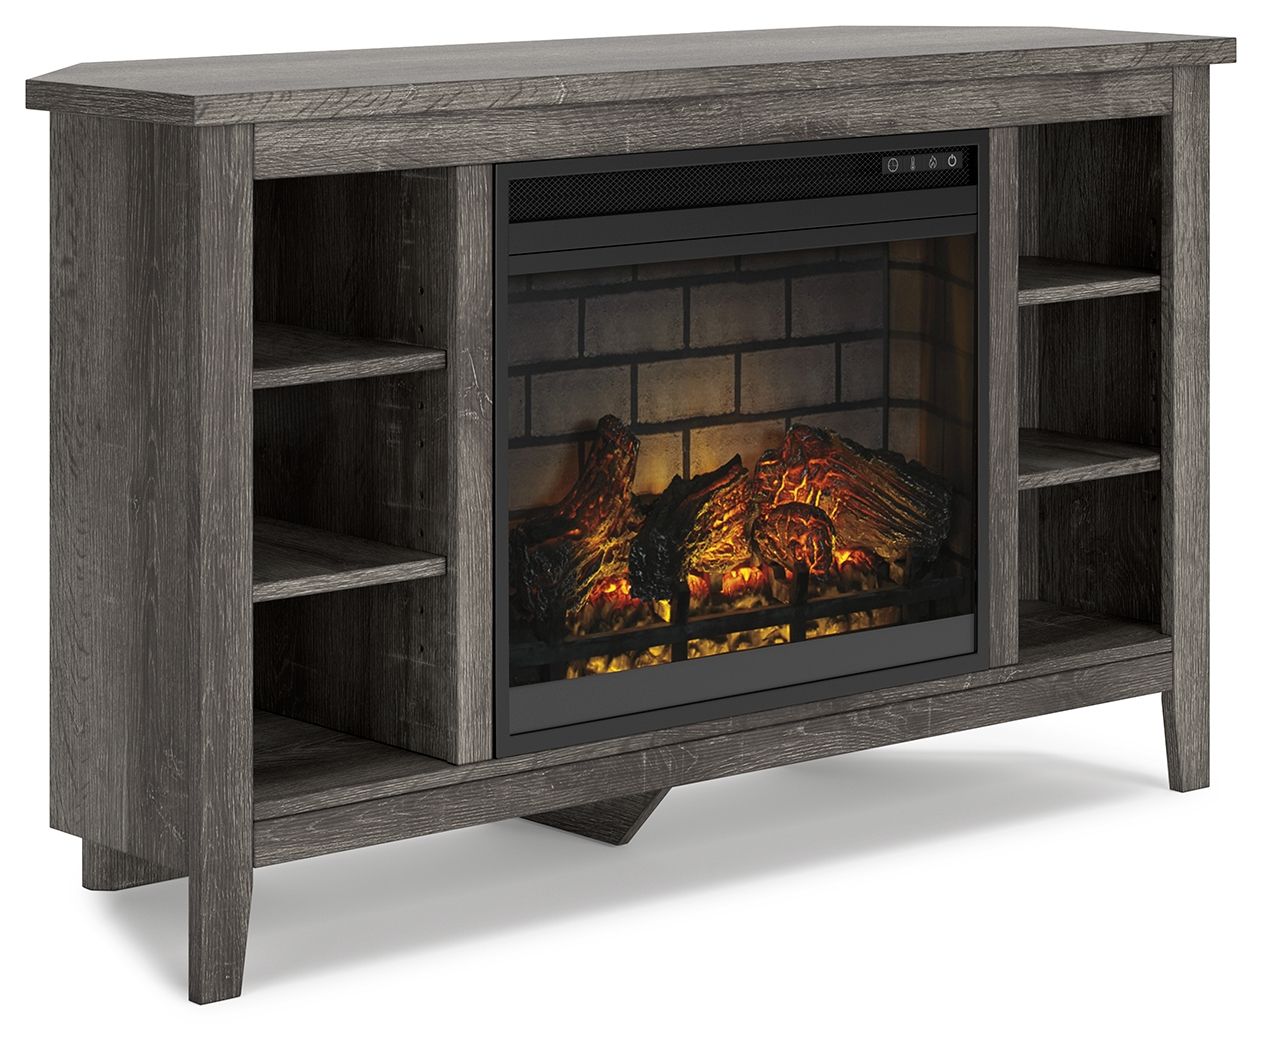 Arlenbry - Gray - Corner TV Stand With Faux Firebrick Fireplace Insert - Tony's Home Furnishings